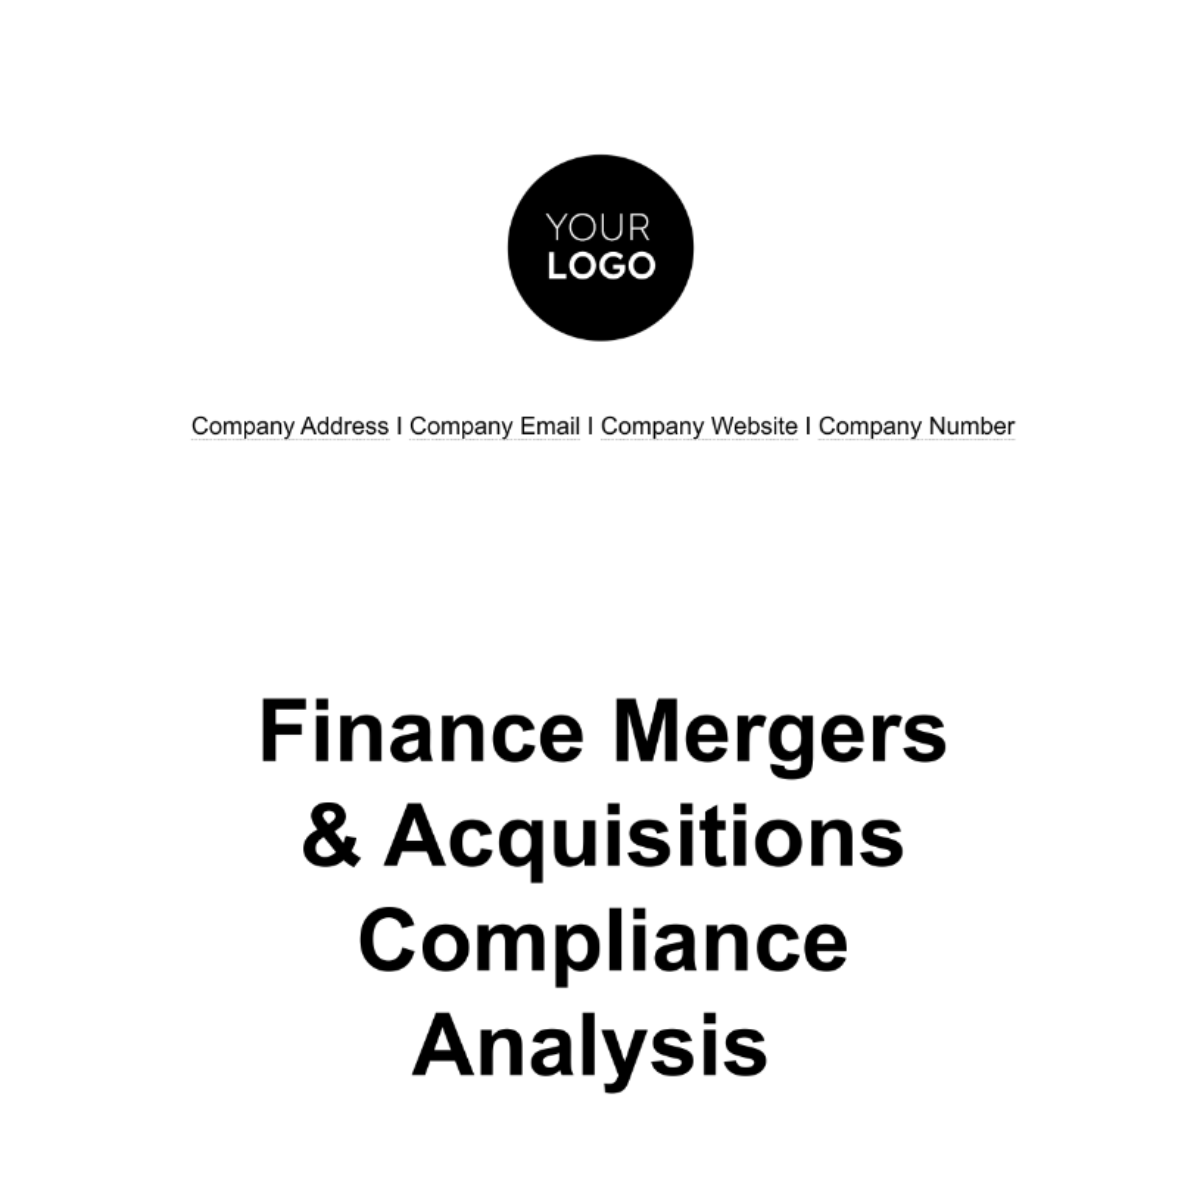 Free Finance Mergers & Acquisitions Compliance Analysis Template